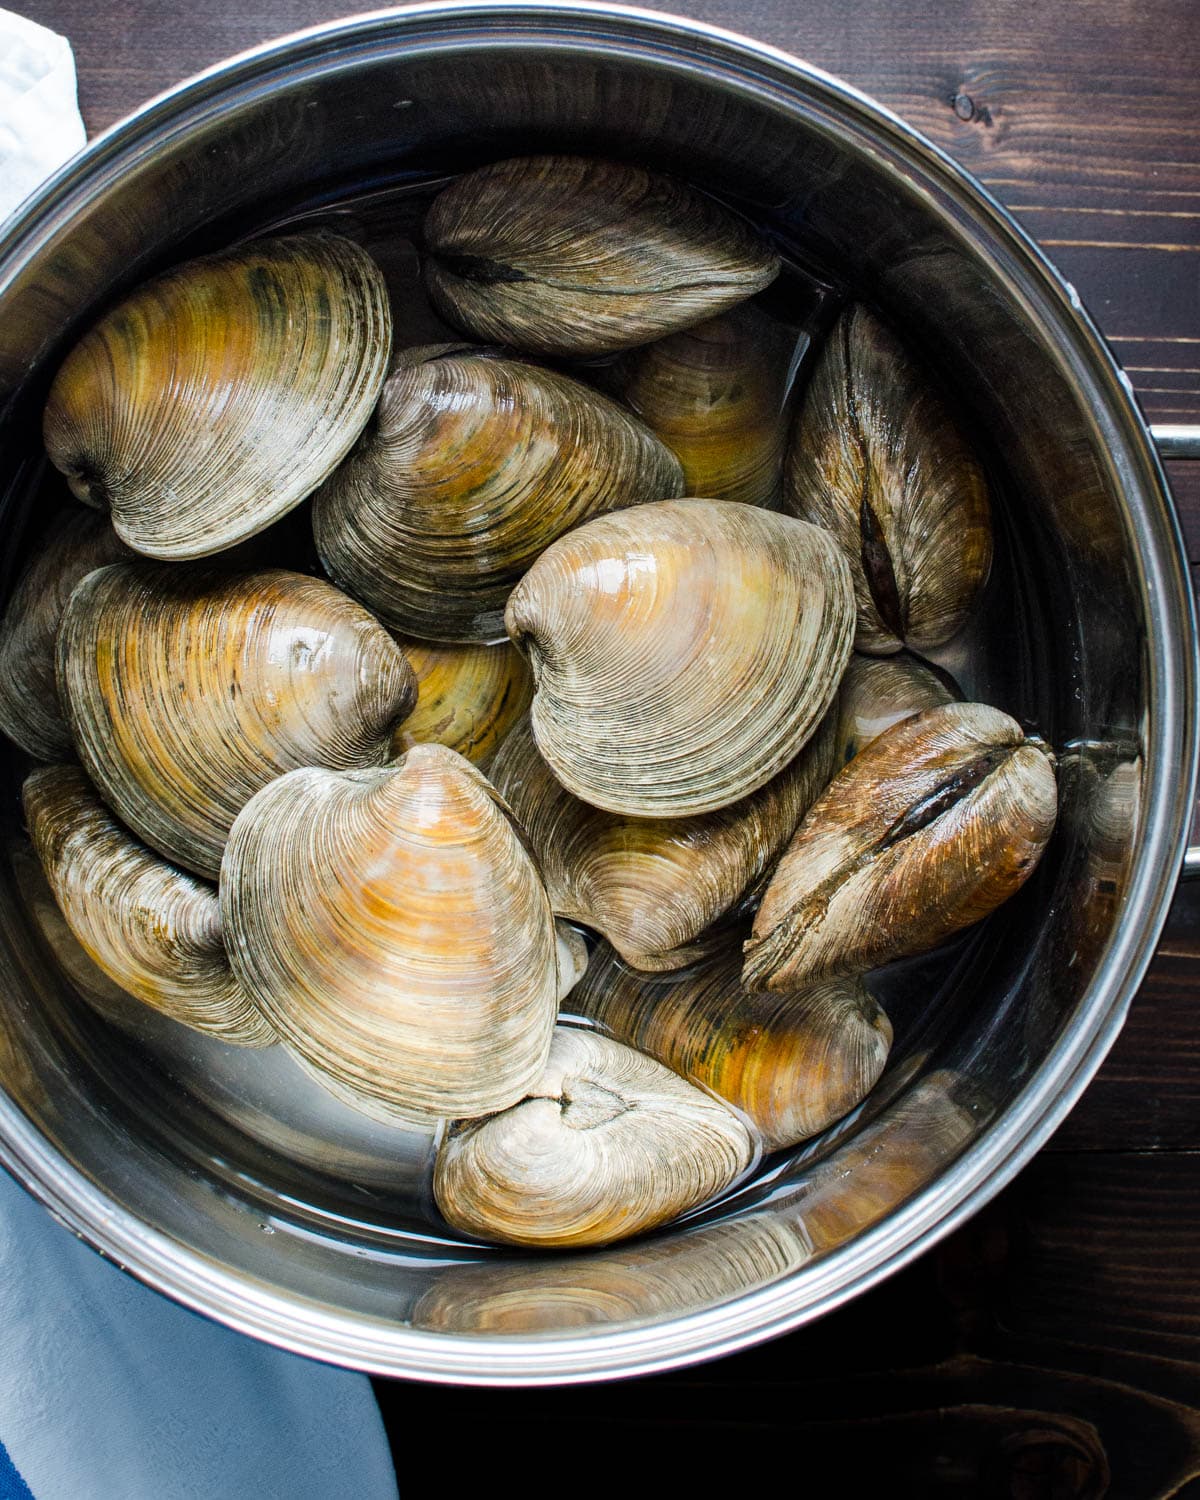 Cherrystone clams in a large stock pot.